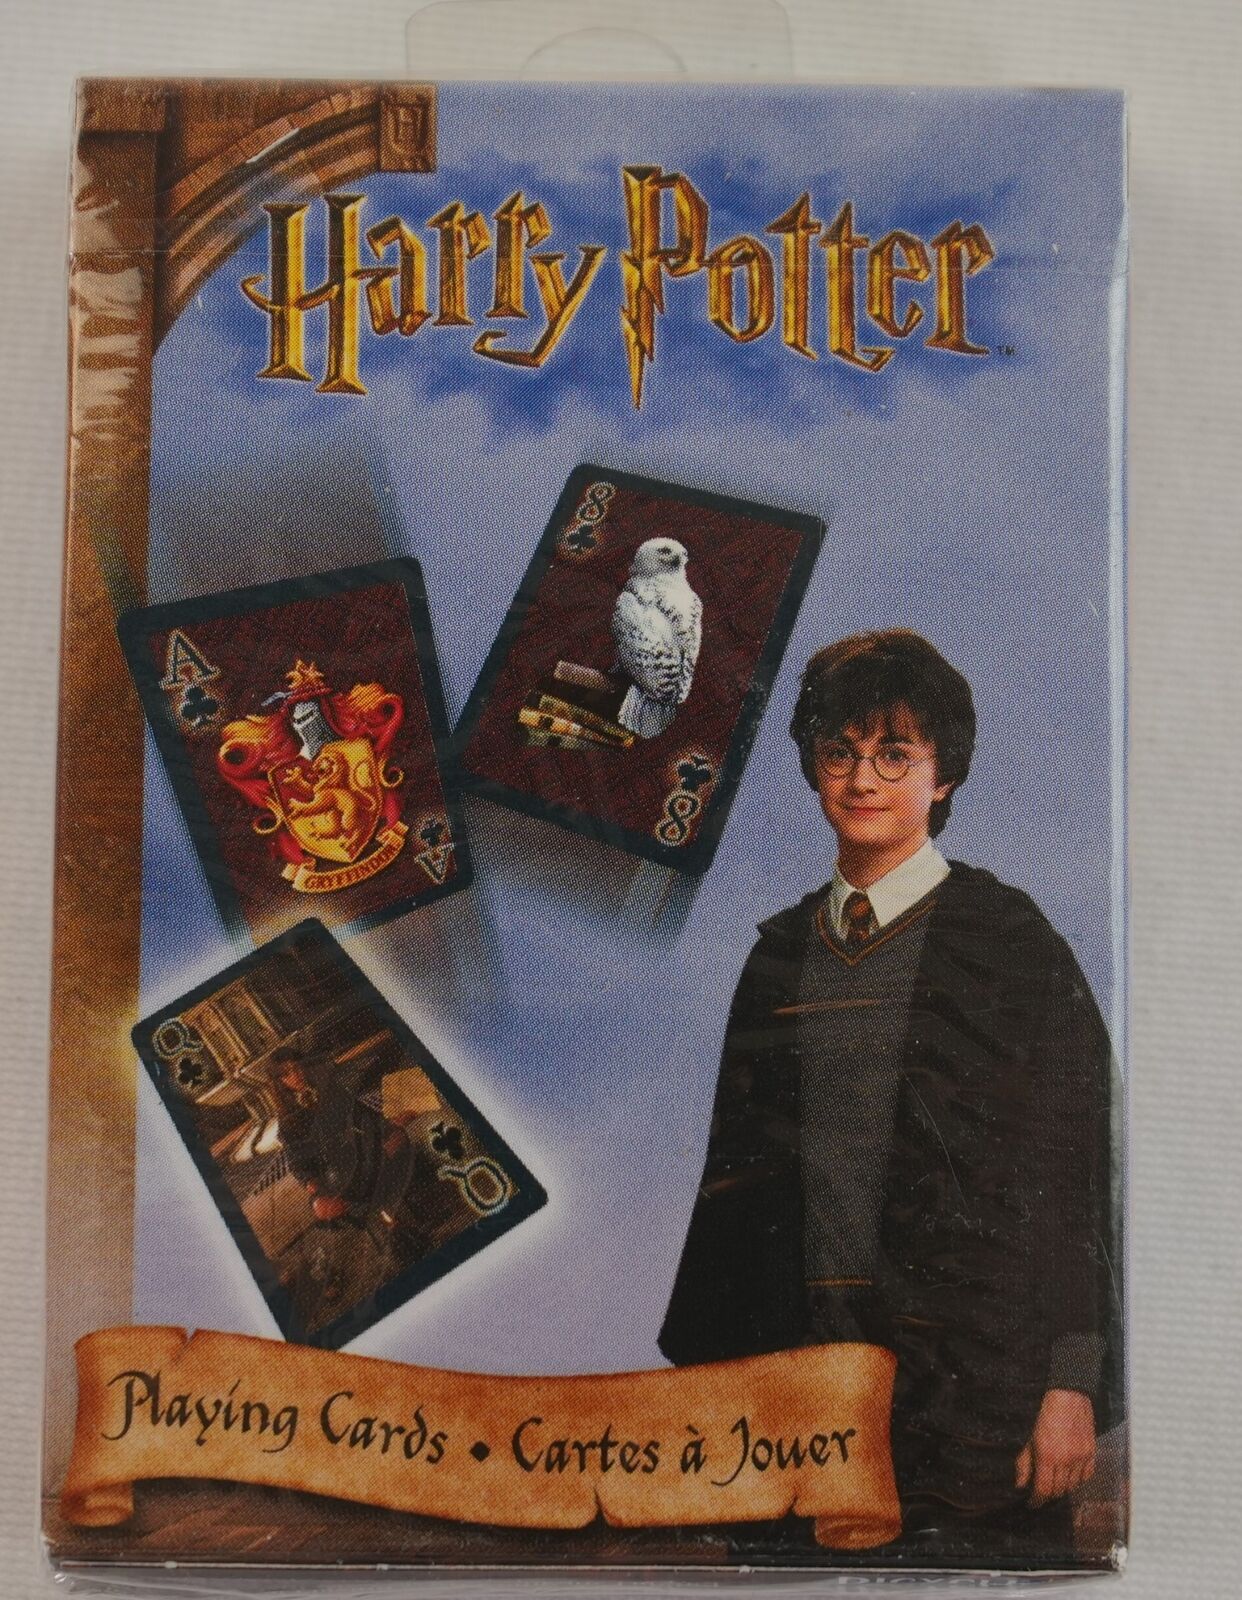  Bicycle Harry Potter 52 Standard Playing Cards Deck